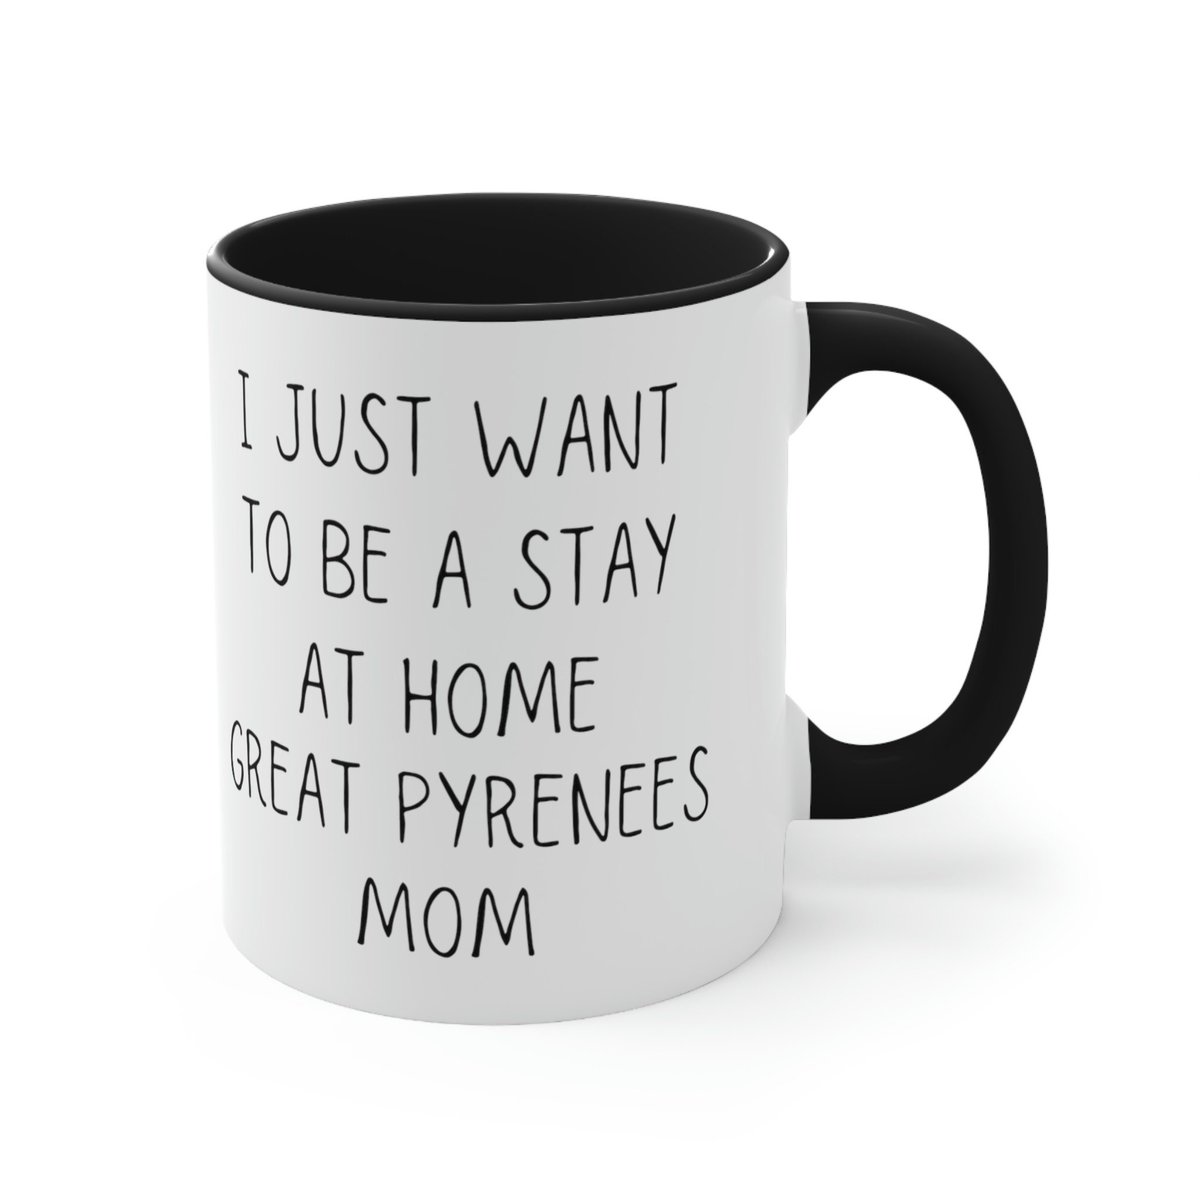 Funny Great Pyrenees Mom Gift Mug #greatpyrenees #greatpyreneesdog #greatpyreneesgift #pyreneesmothersday #greatpyreneesmom #greatpyreneesmug #greatpyreneesemombirthday CLICK HERE TO BUY NOW: etsy.me/3AcH34O